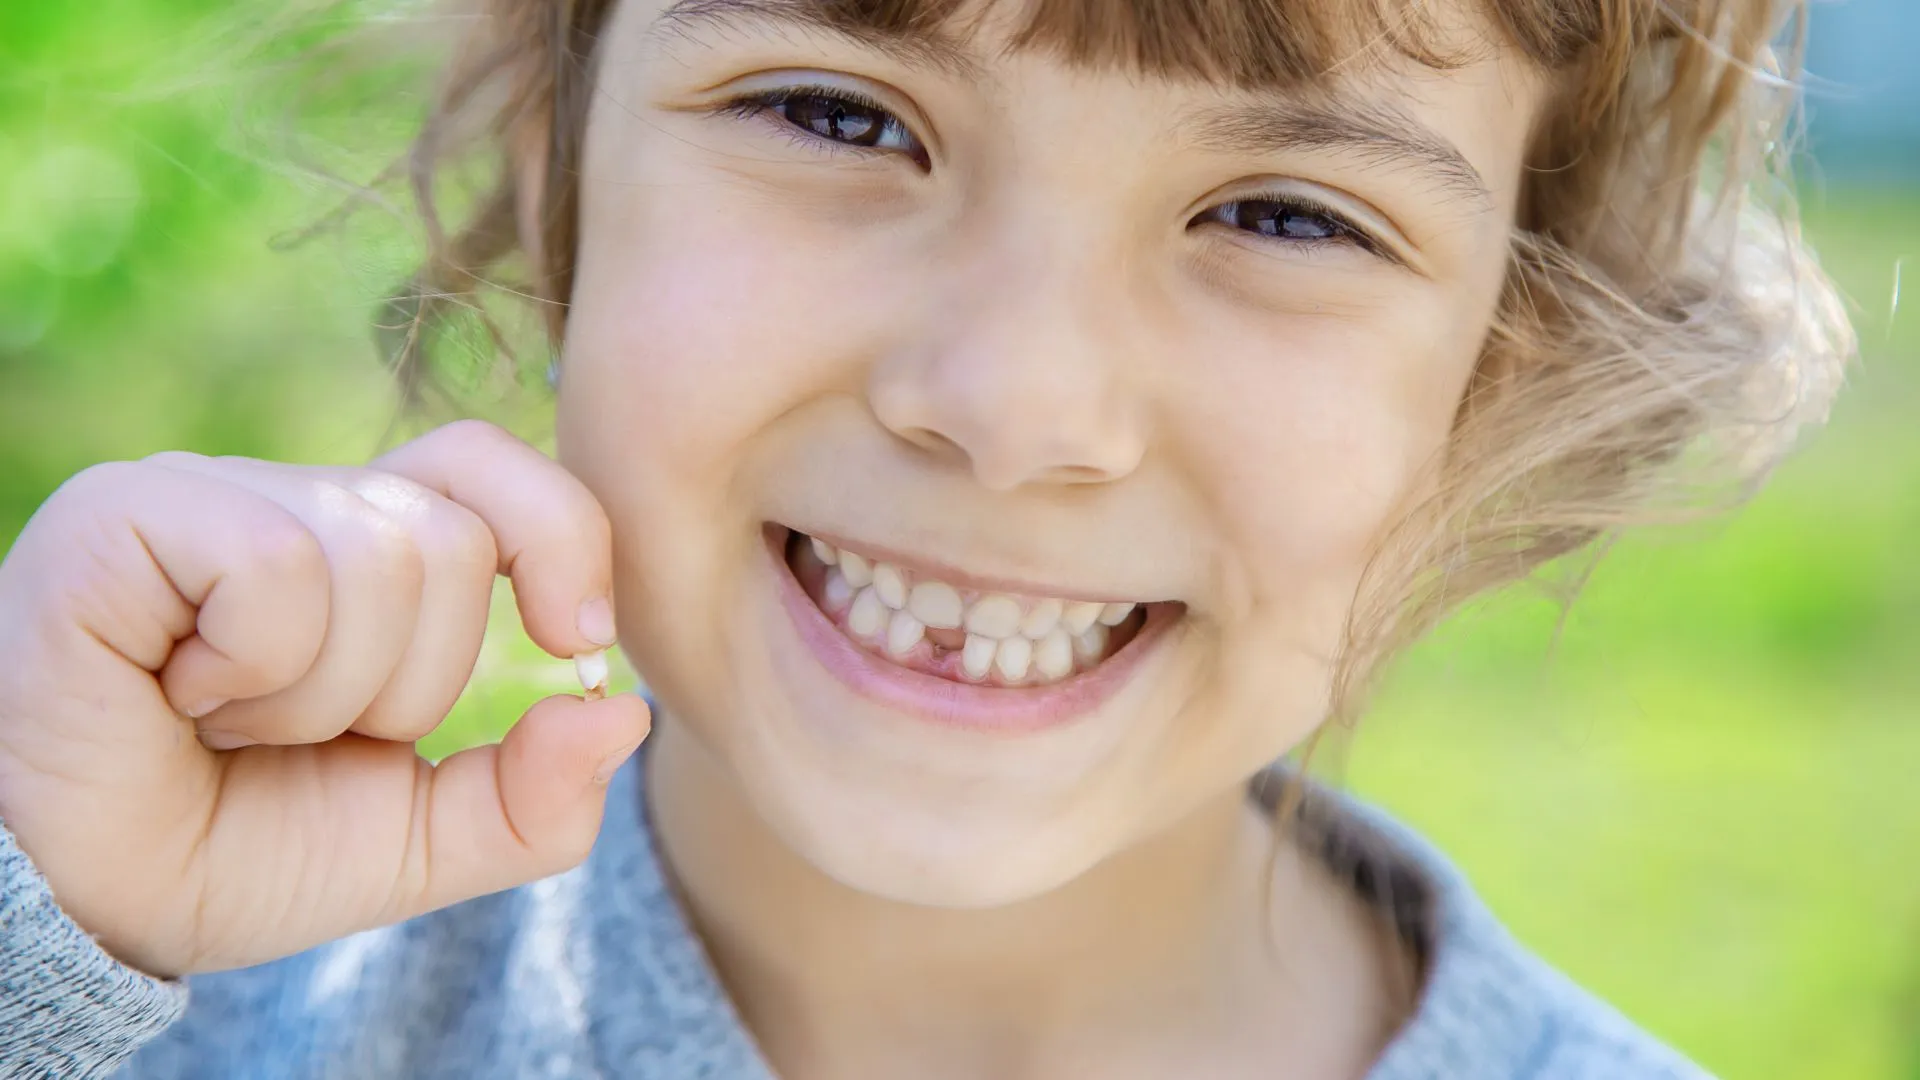 2 Issues That Can Cause Your Child to Lose Their Permanent Teeth Prematurely